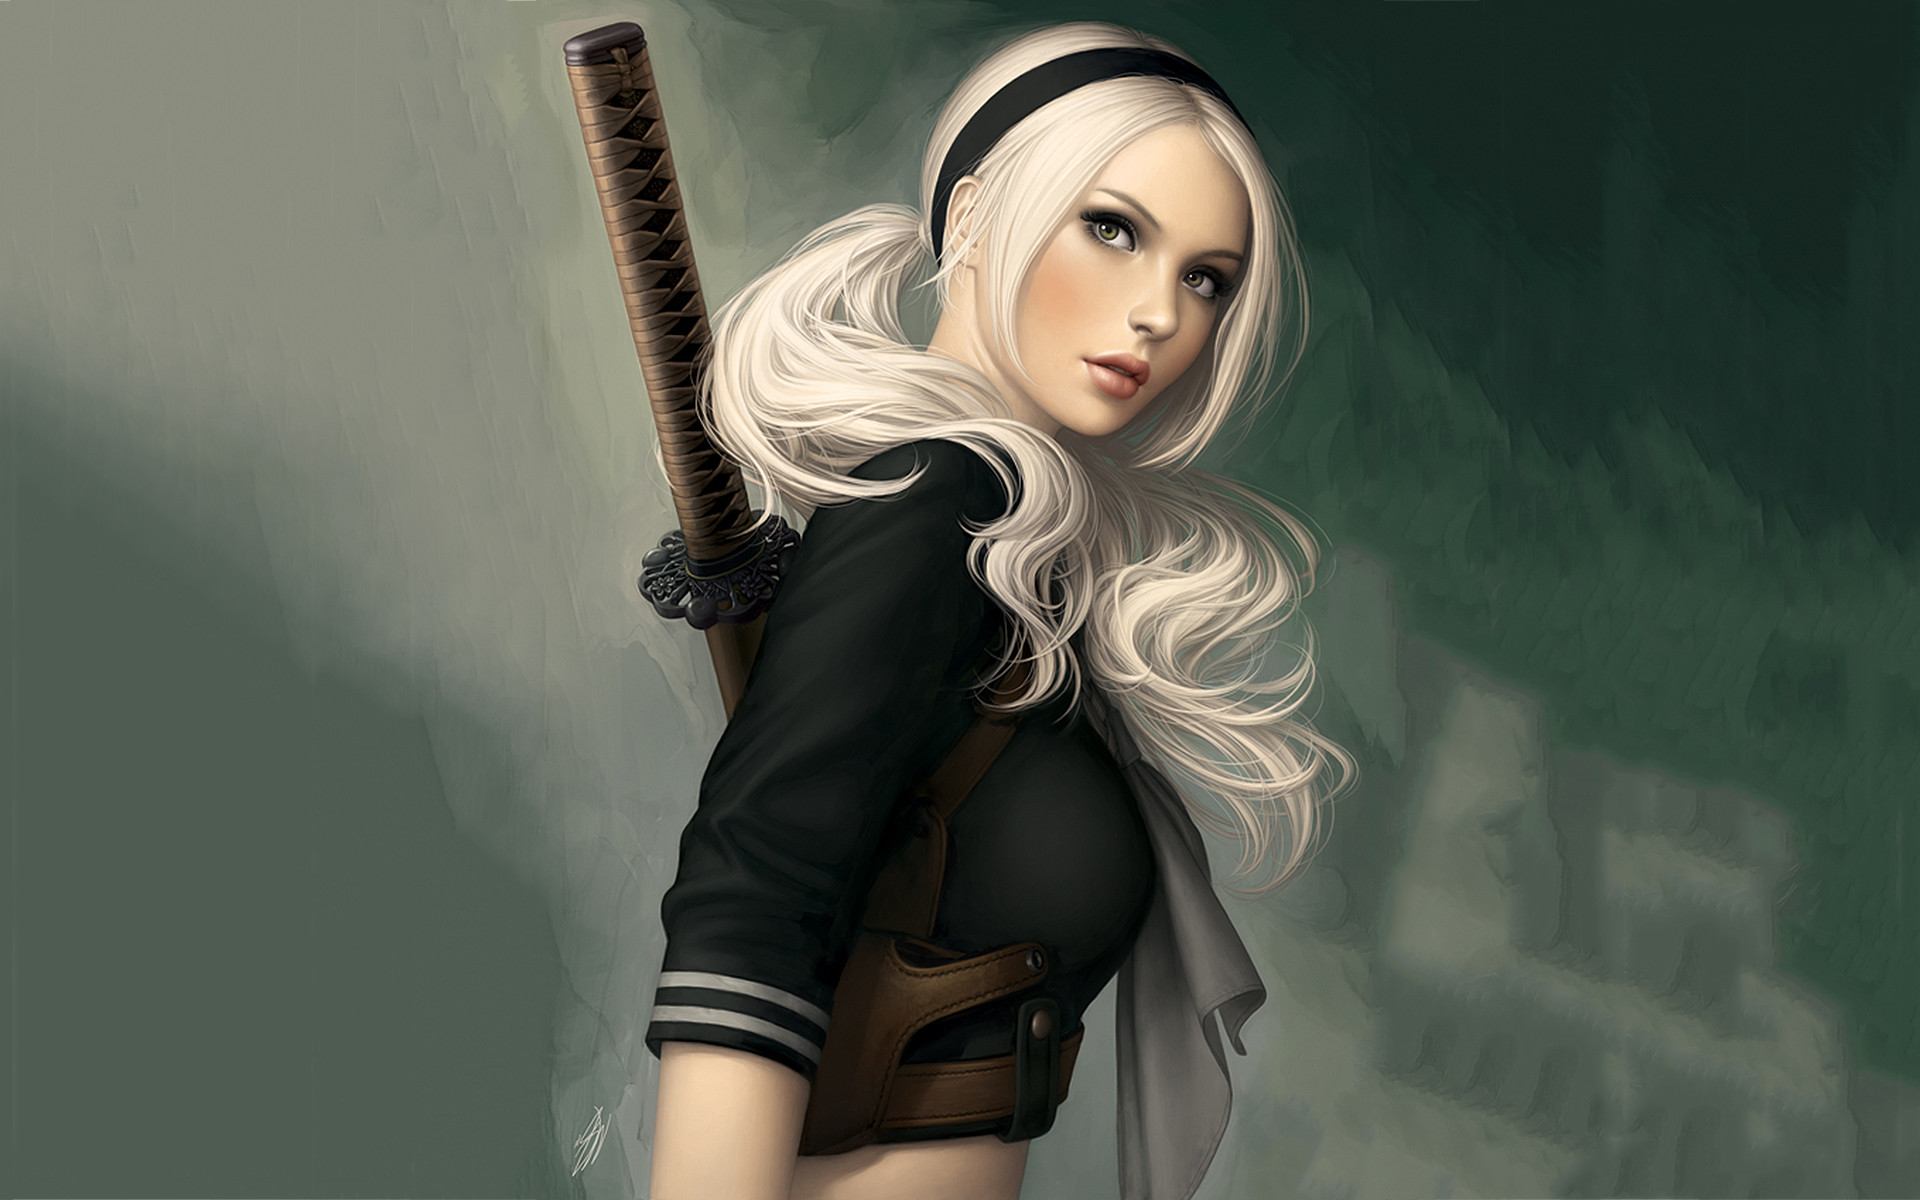 1920x1200 Wallpapers Woman Samurai Description The Above Is Blonde Girl In .